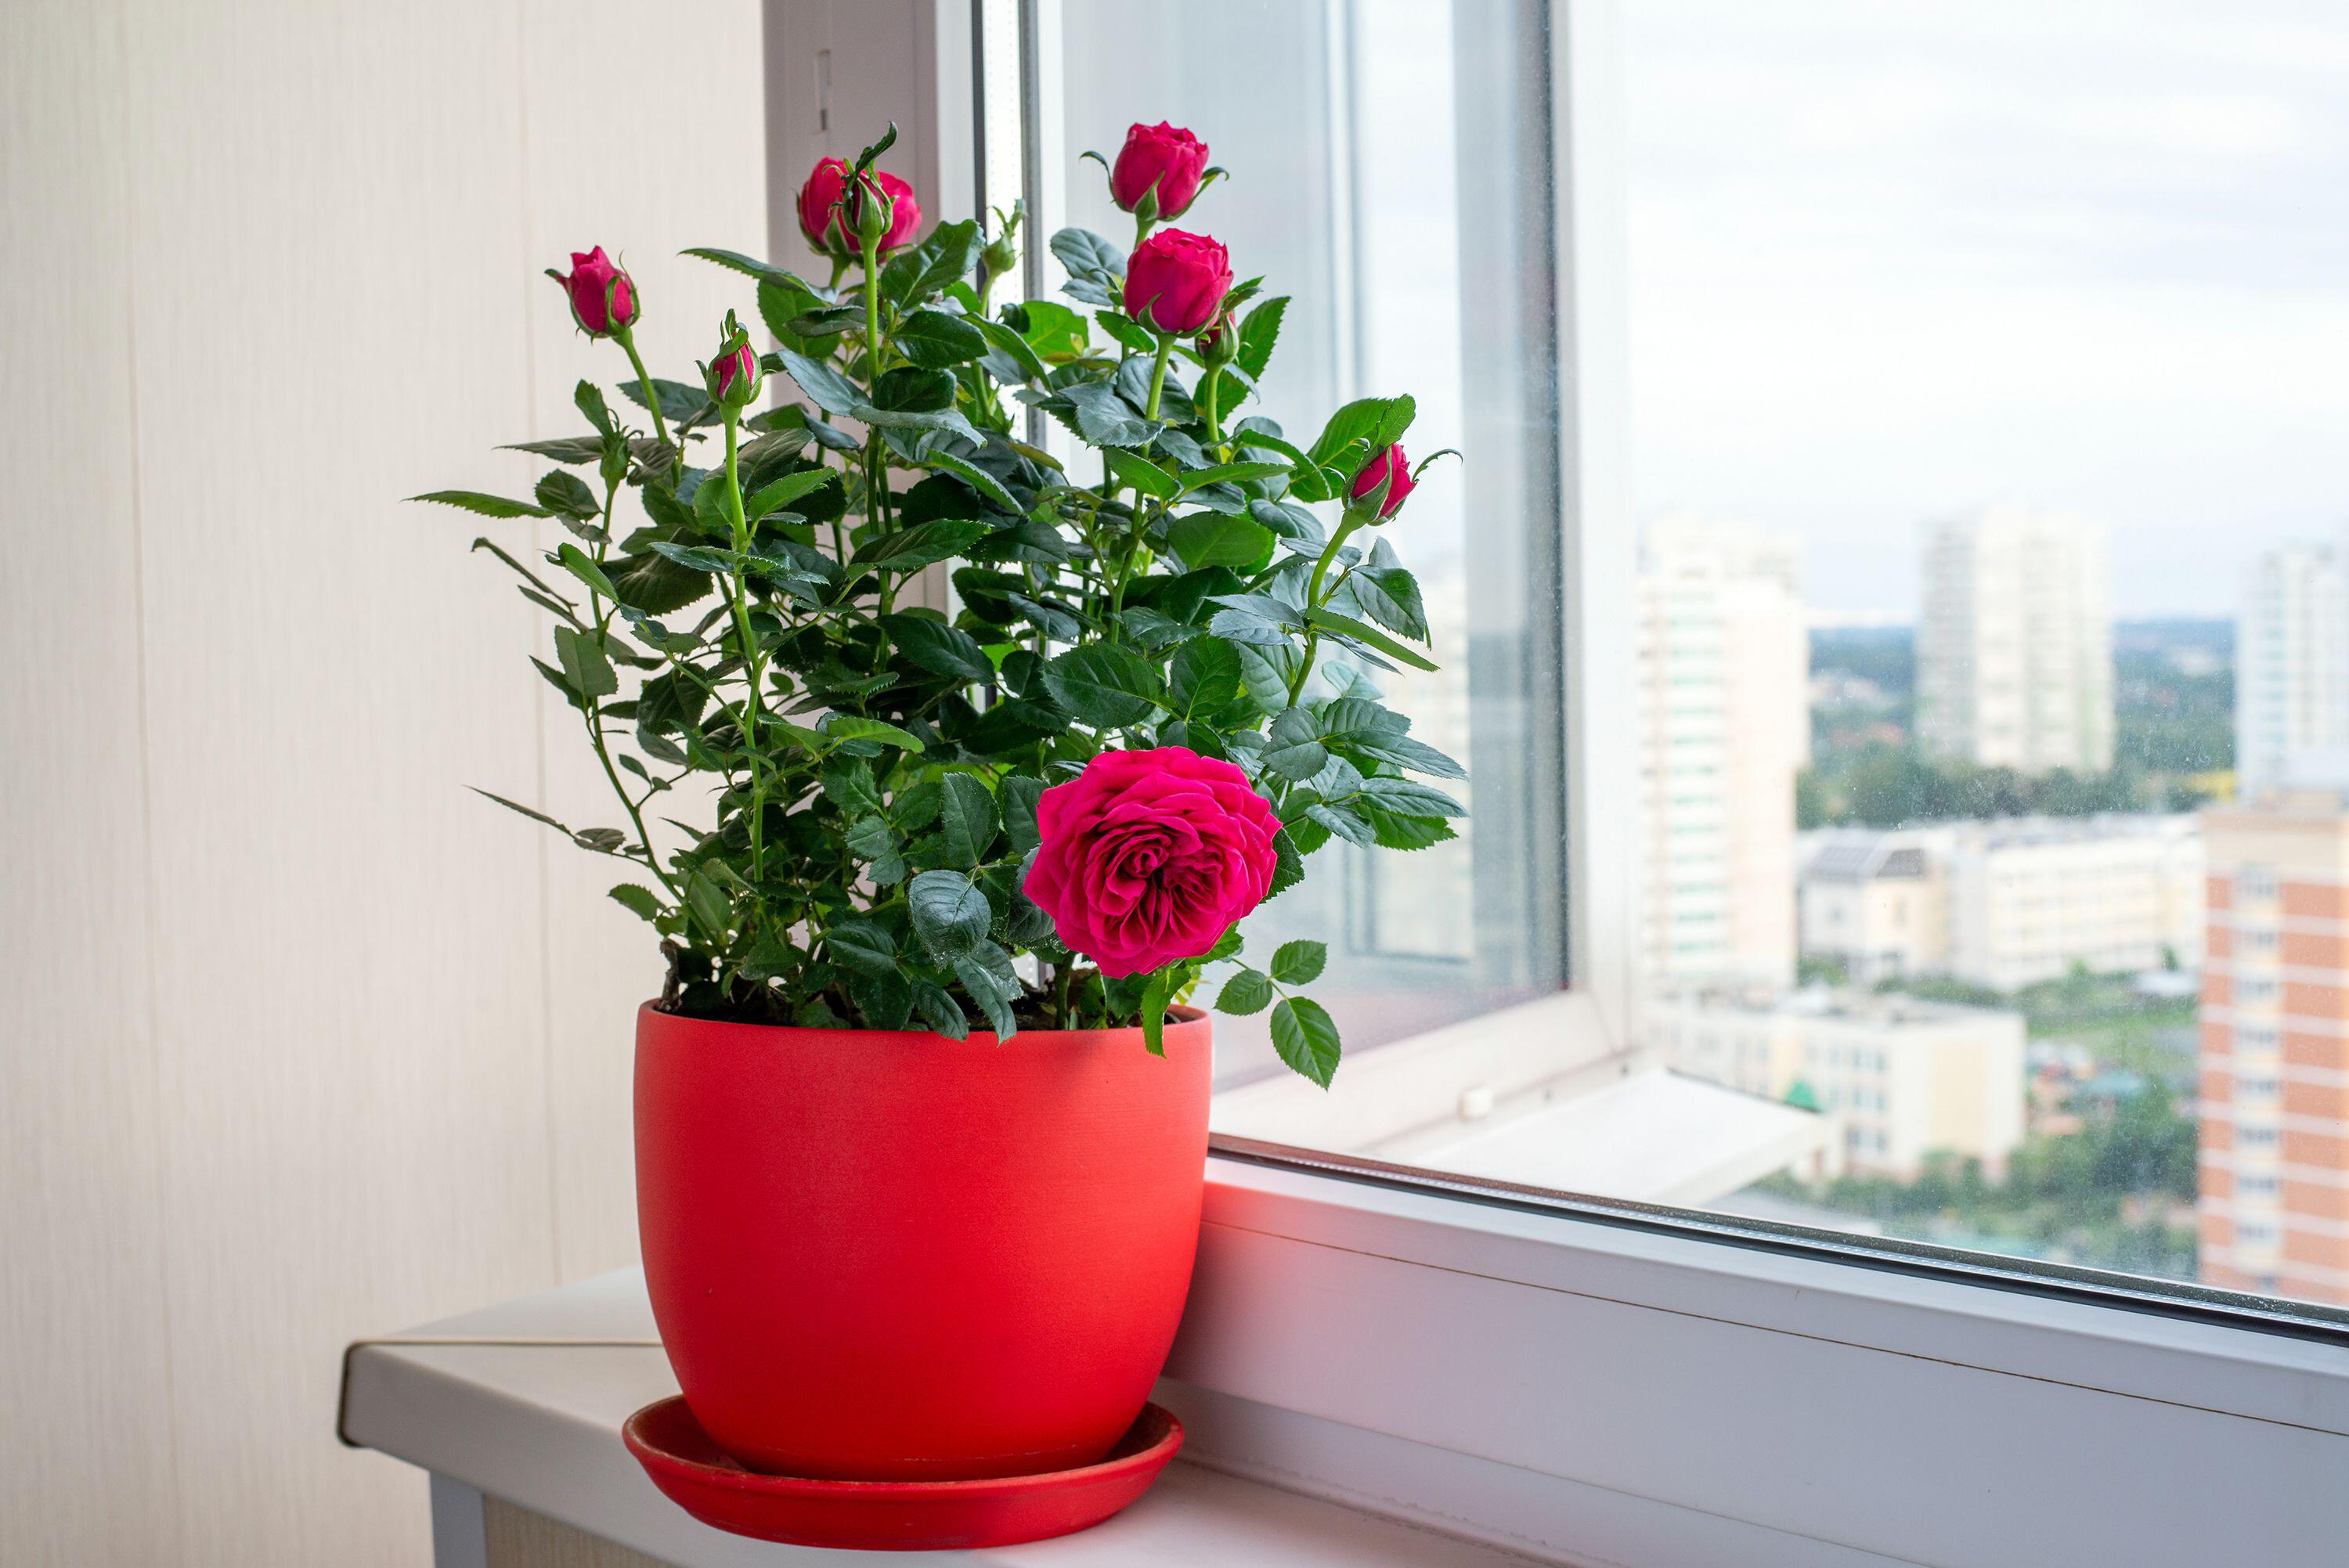 Potted rose by a window (Alamy/PA)